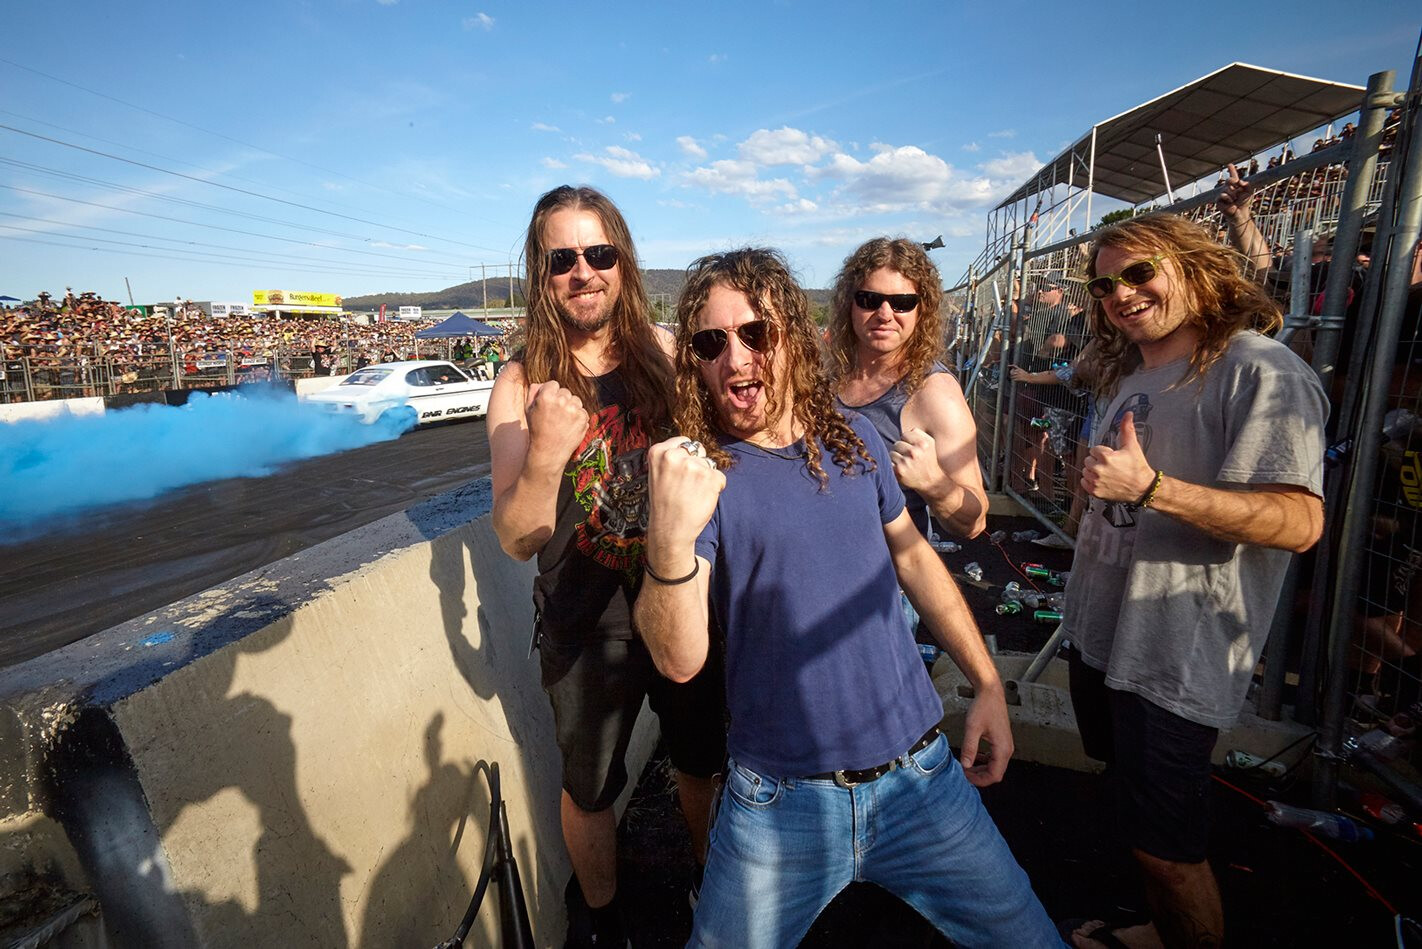 INTERVIEW WITH ROCK STARS AIRBOURNE AT SUMMERNATS 30 – VIDEO